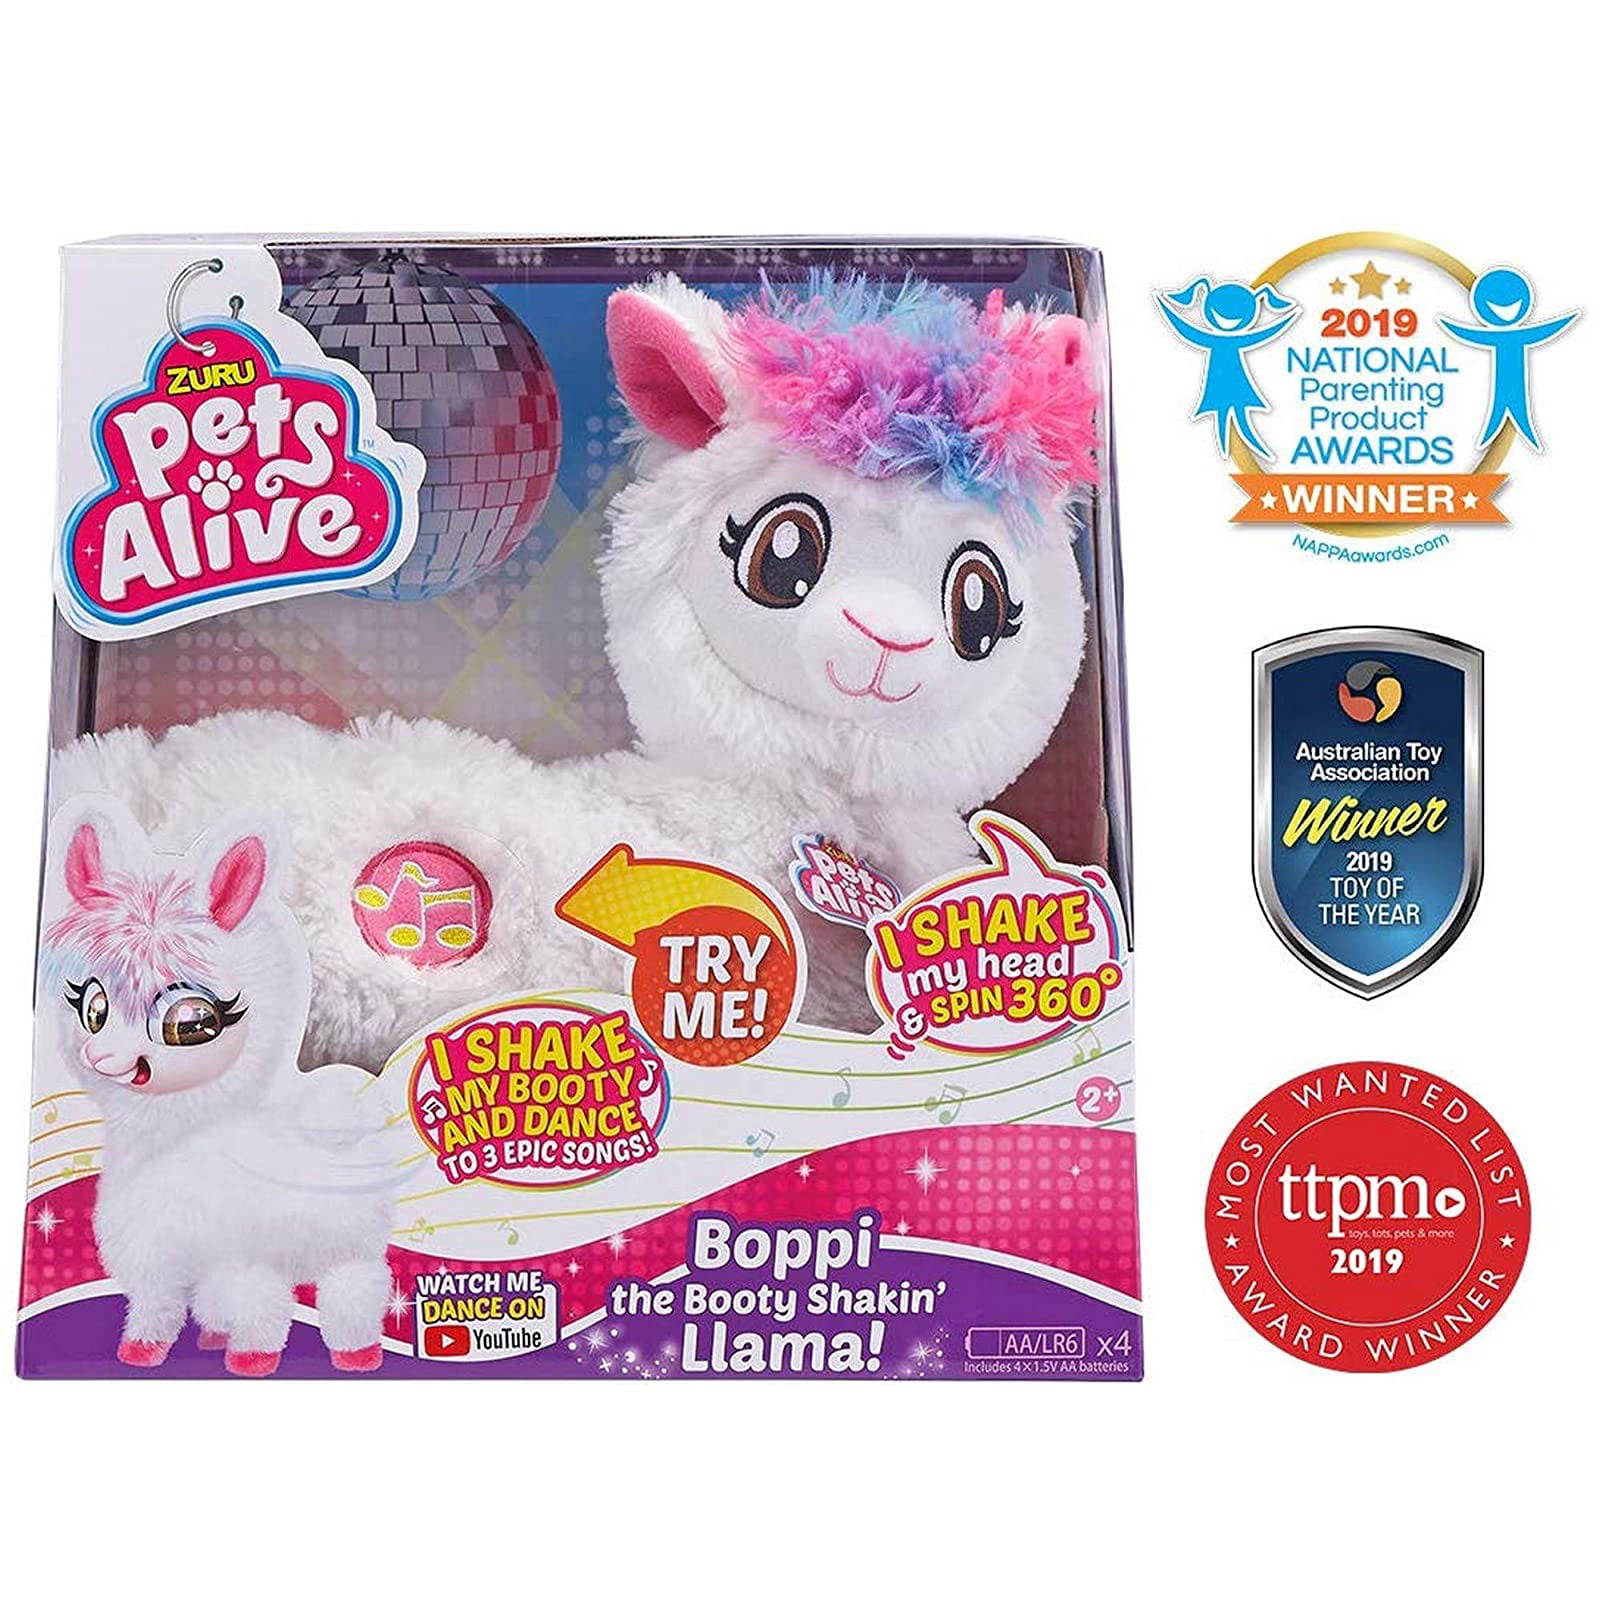 Pets Alive Boppi The Booty Shakin Llama Battery Powered Dancing Robotic Toy ZURU for sale online 